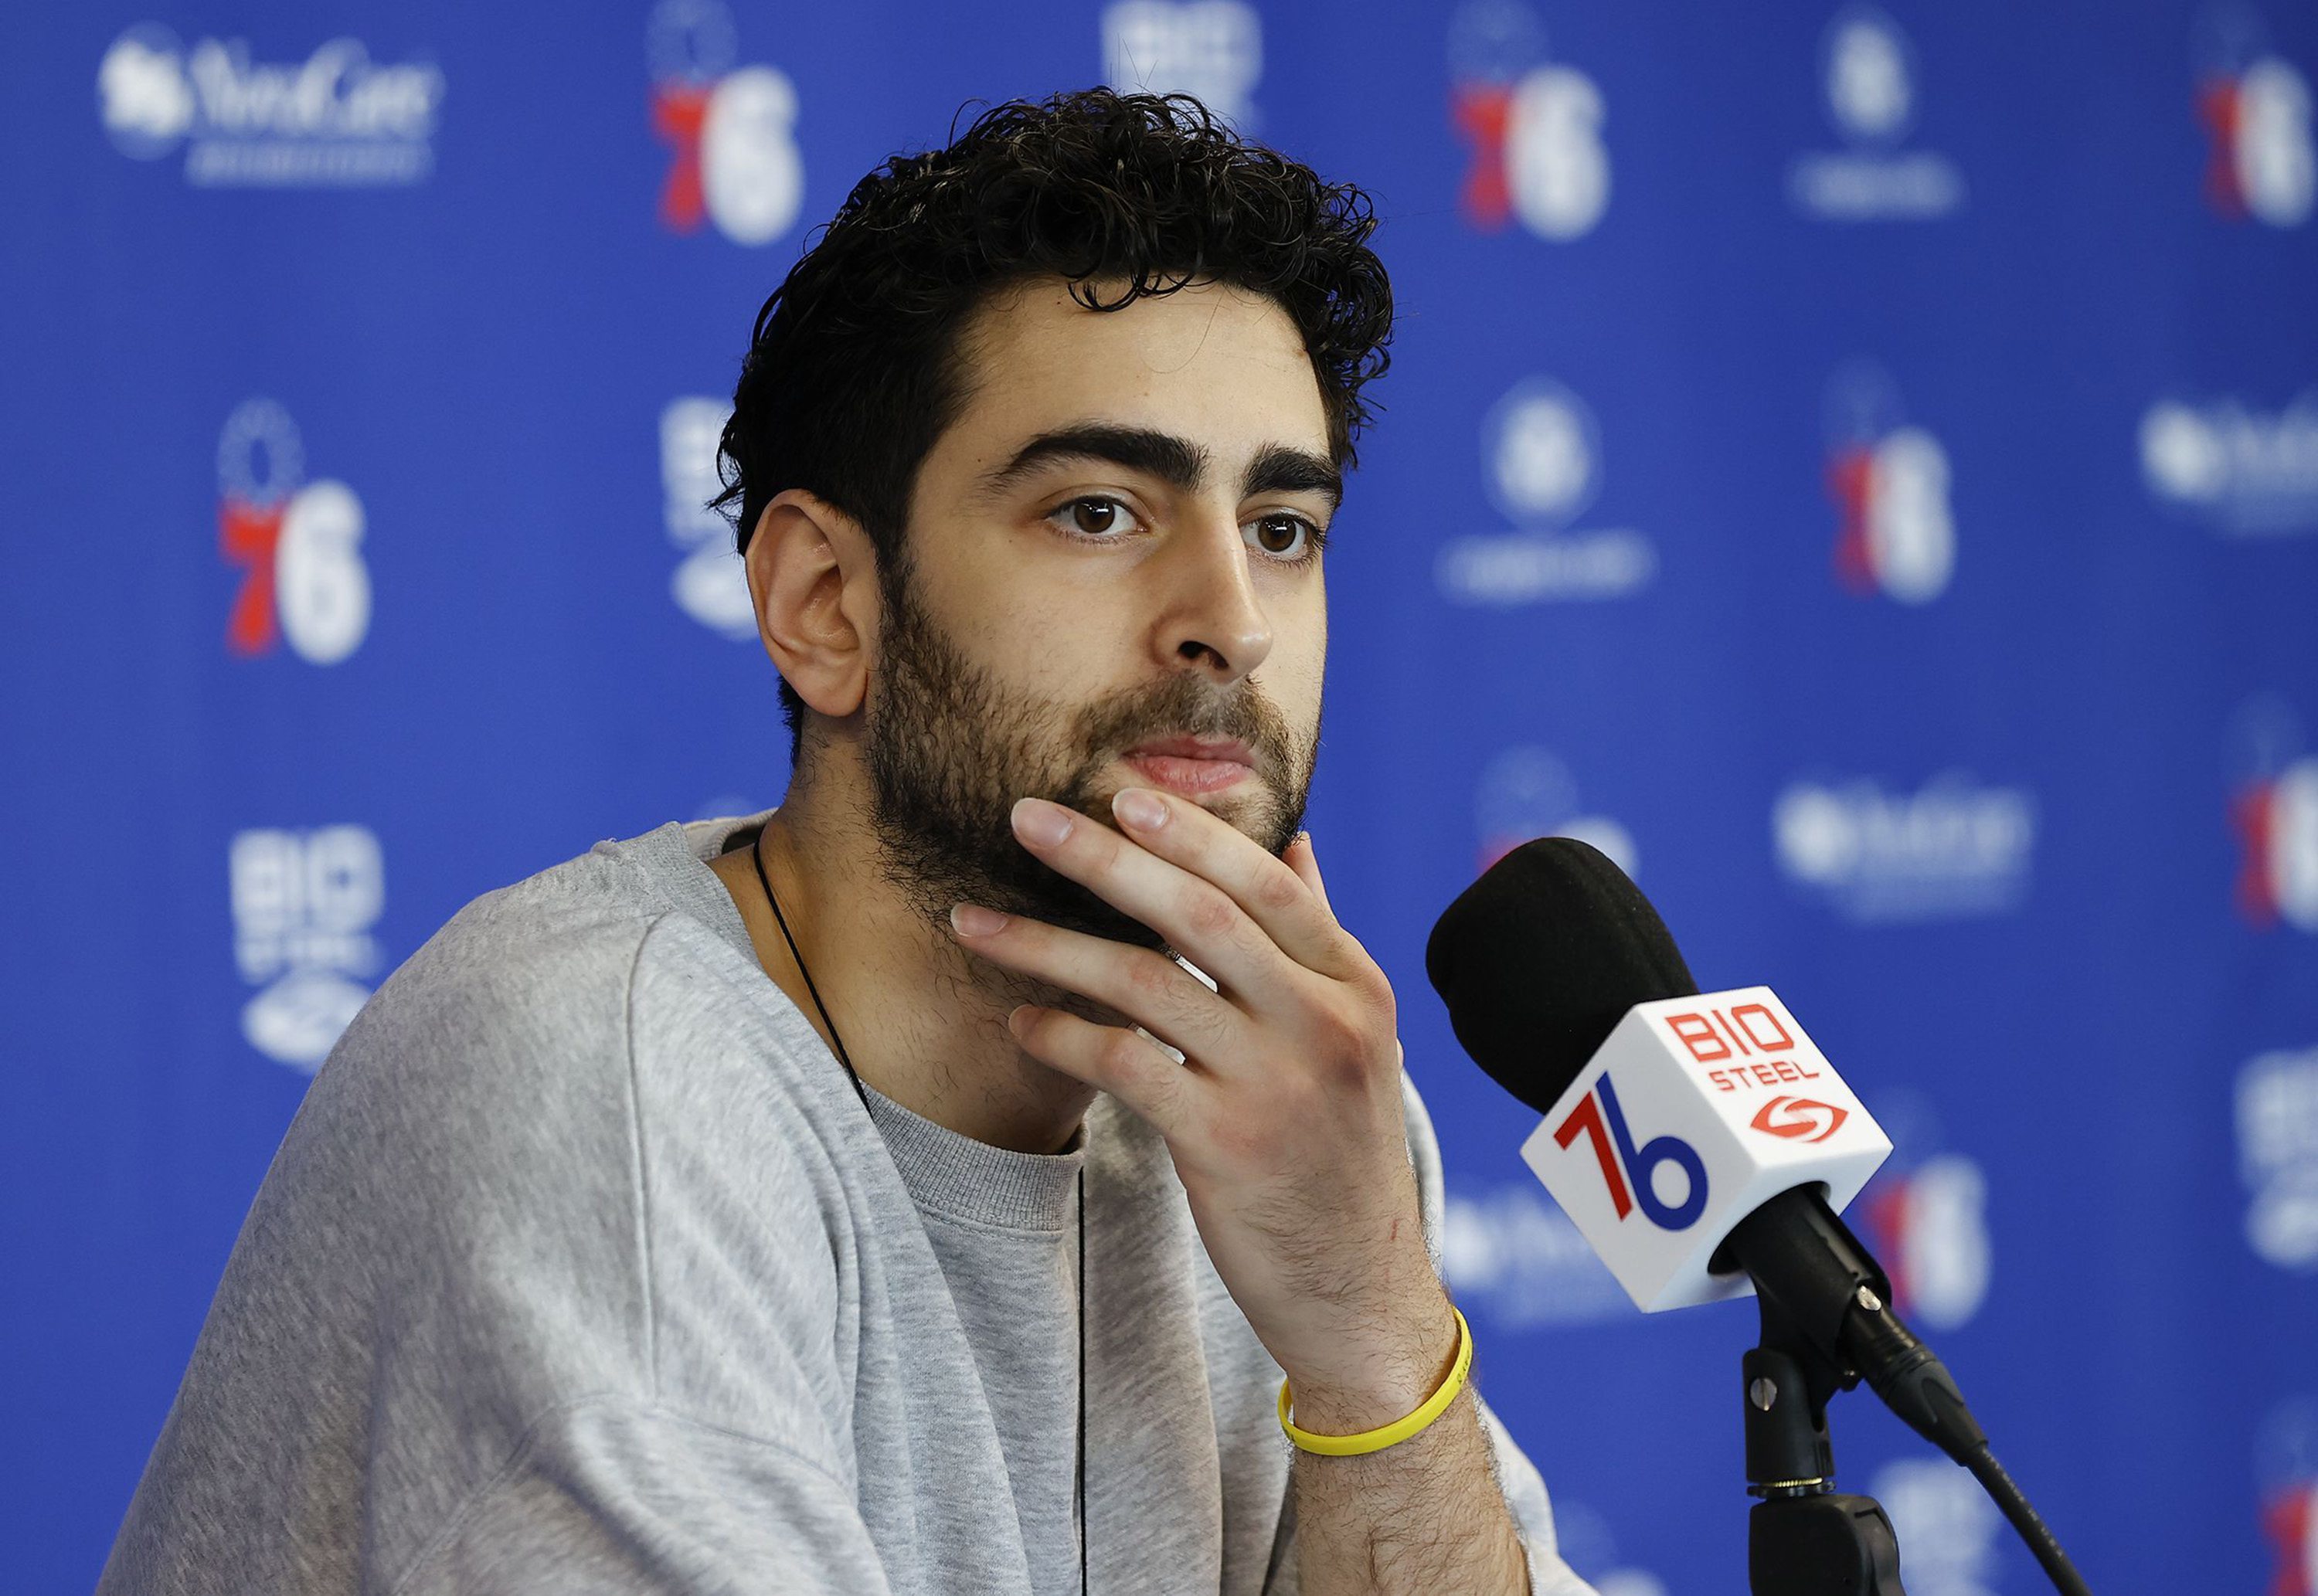 NBA Trade Rumors: Furkan Korkmaz trade request is opportunity for 76ers